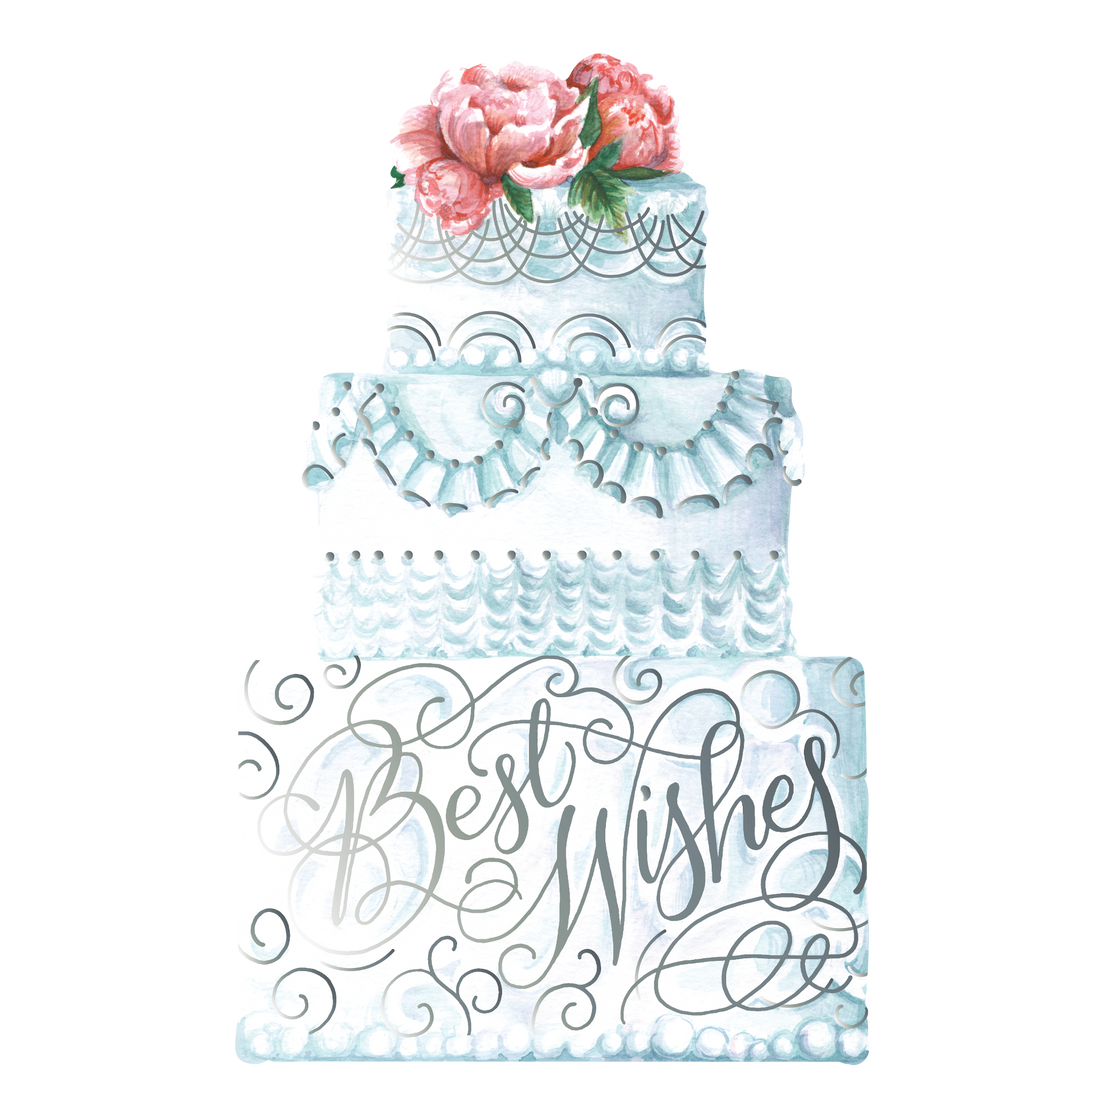 Best Wishes Cake Grand Flat Note